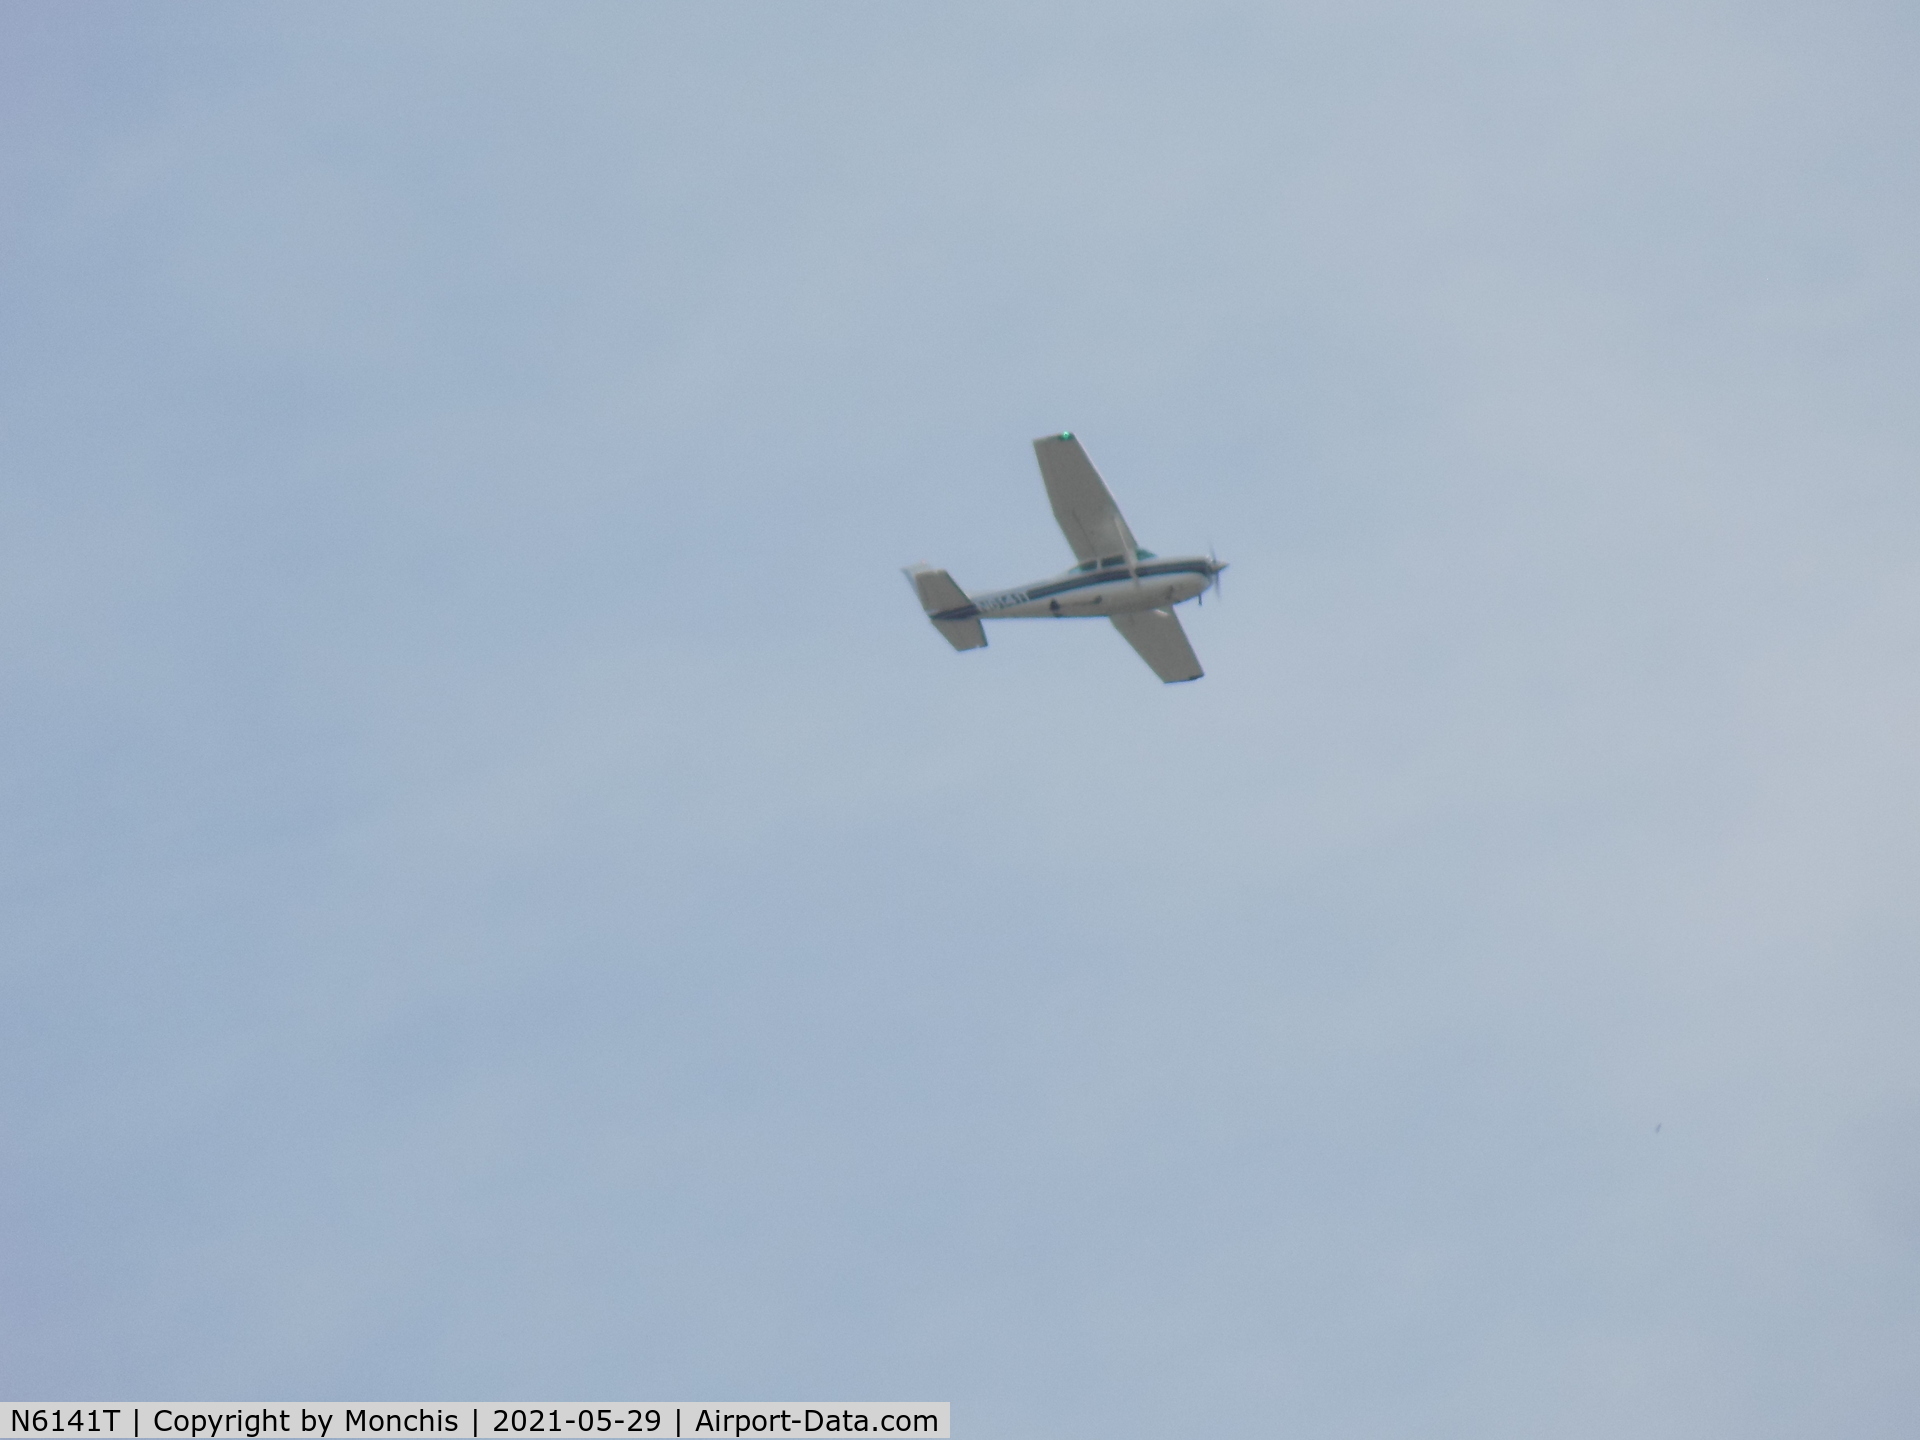 N6141T, 1982 Cessna TR182 Turbo Skylane RG C/N R18201918, Picture of a Cessna cruising at 2,000